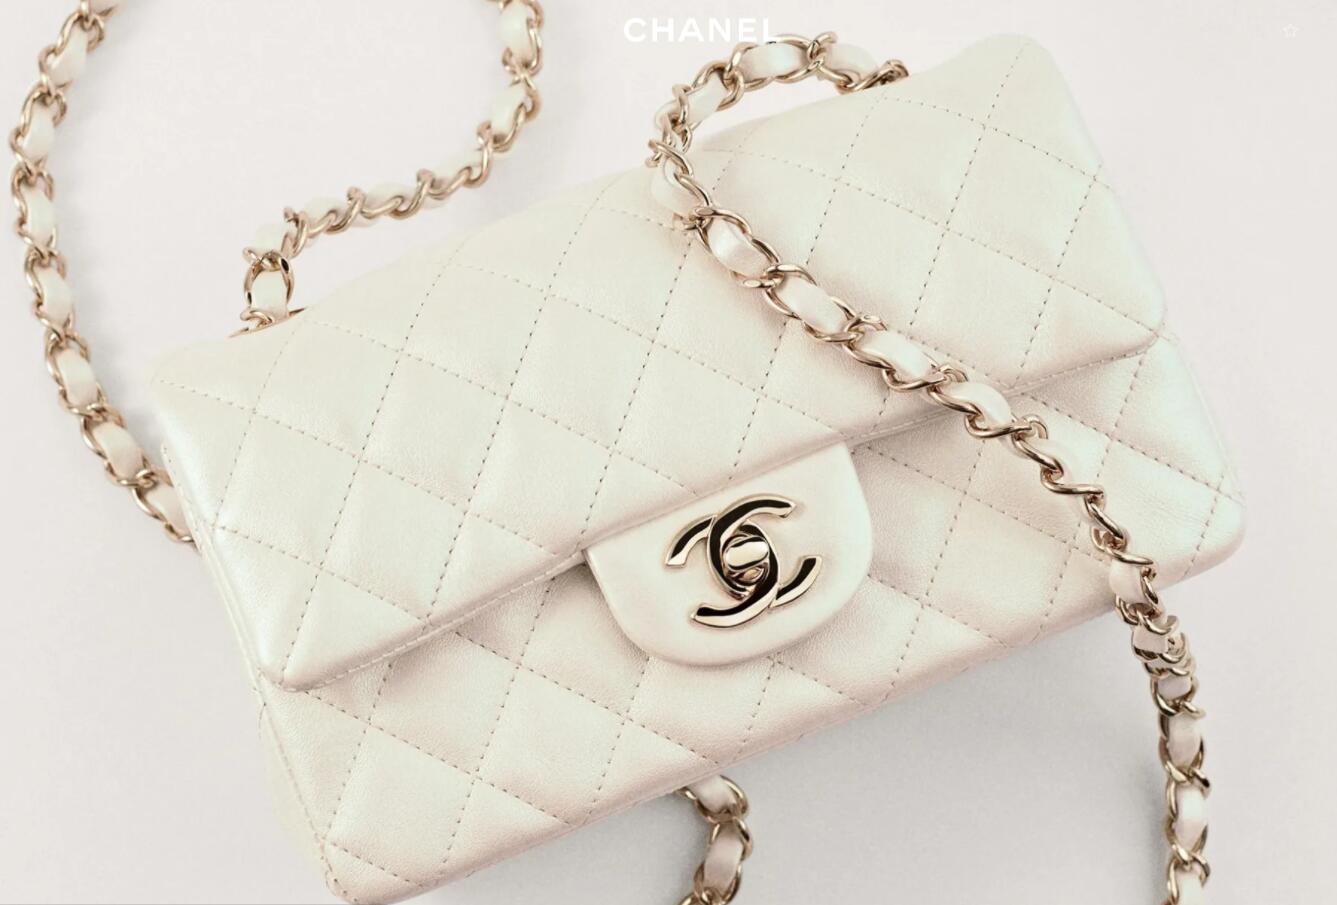 Chanel 2.55 vs. Classic Flap vs. 2.55 bag vs WOC: Which Should You Buy If Is Your First Luxury Bag?